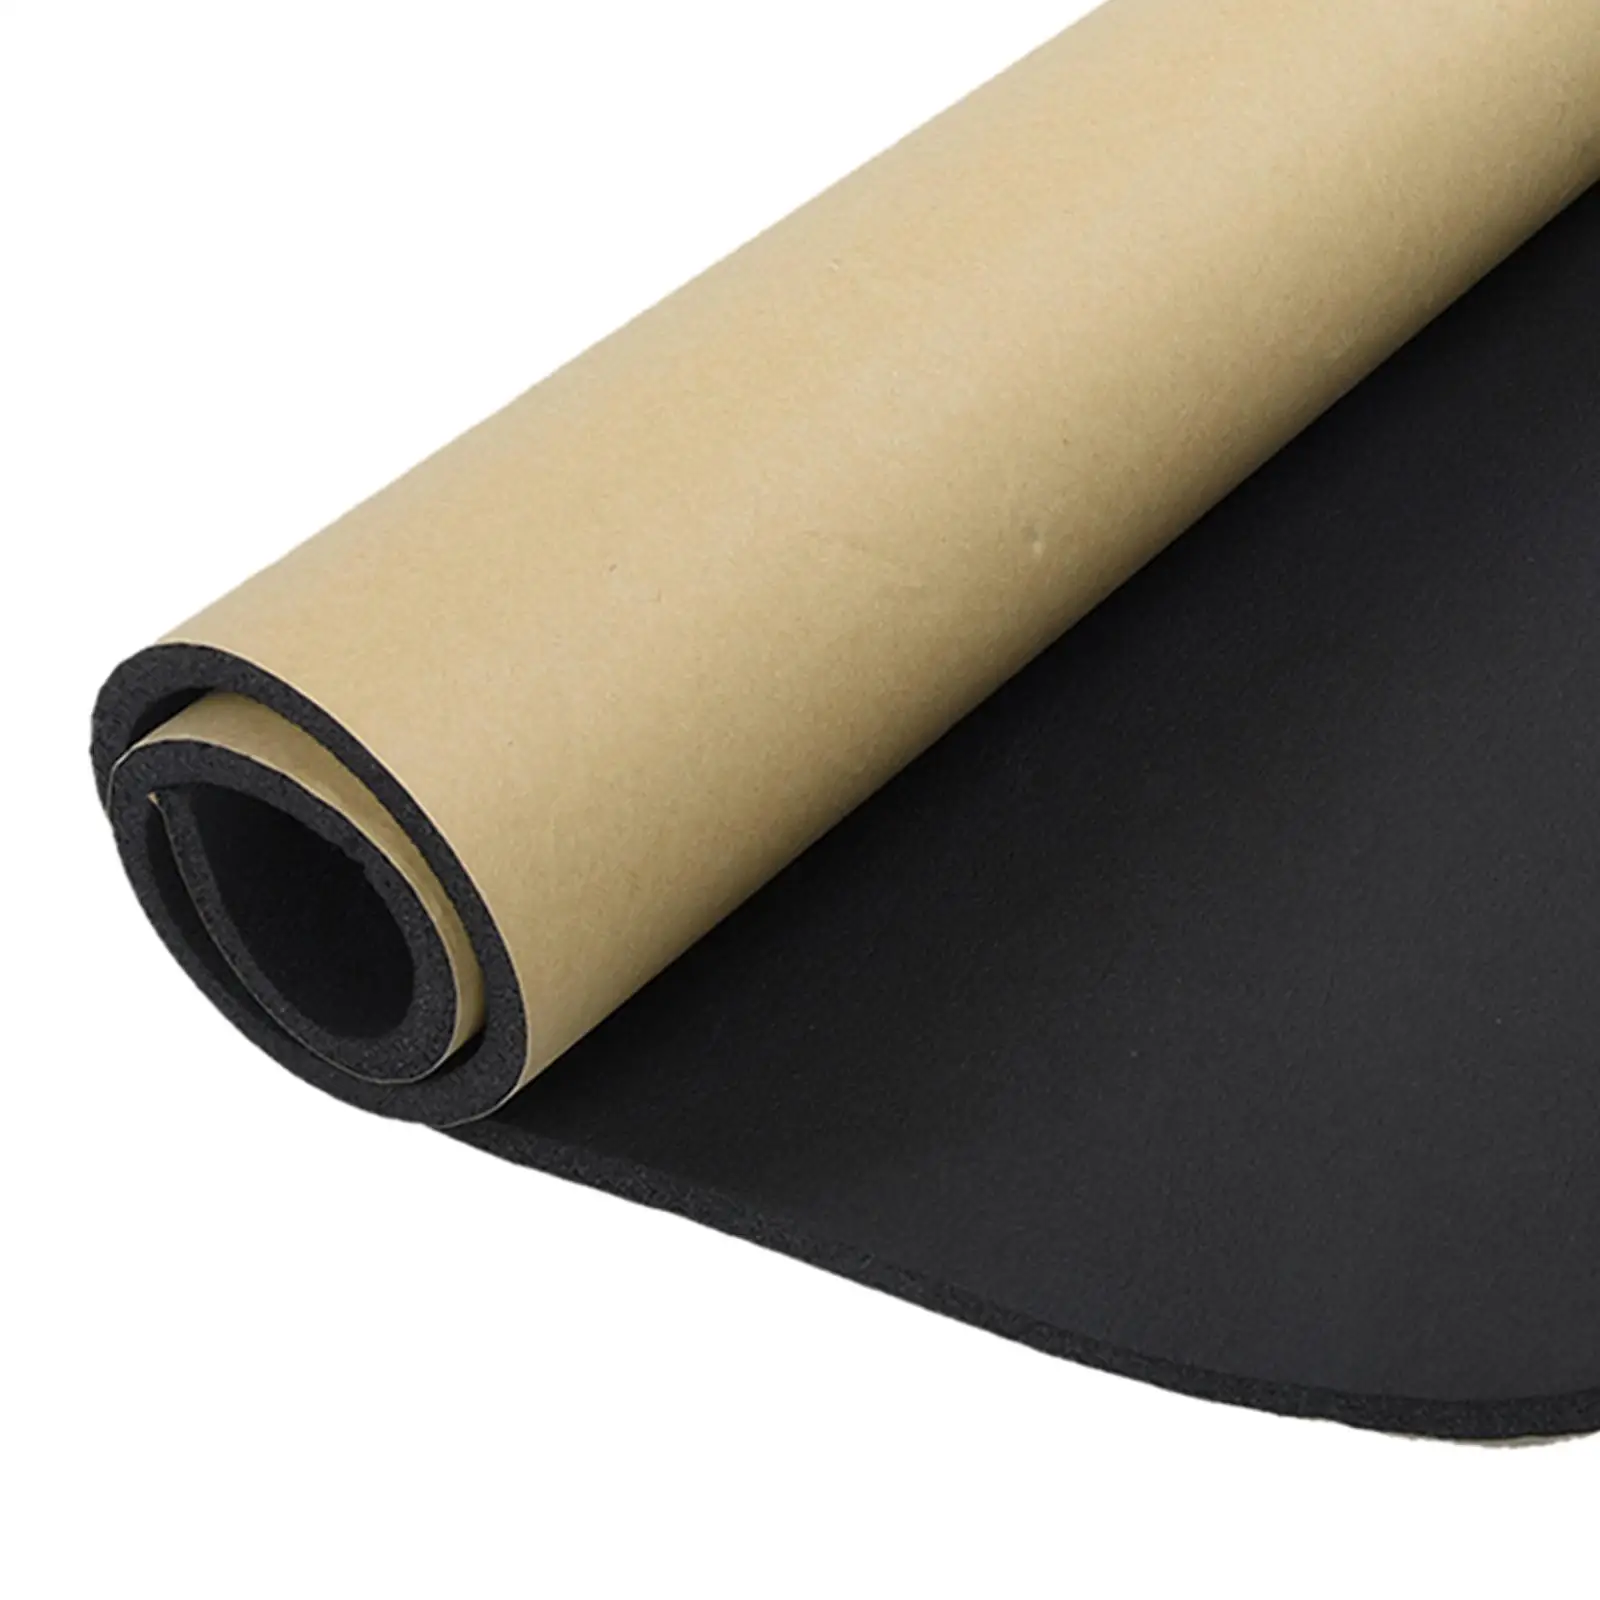 Car Insulation Mat Waterproof Engine Insulation Foam Laminate Easily Install for Engine Hood Roof Soundproof